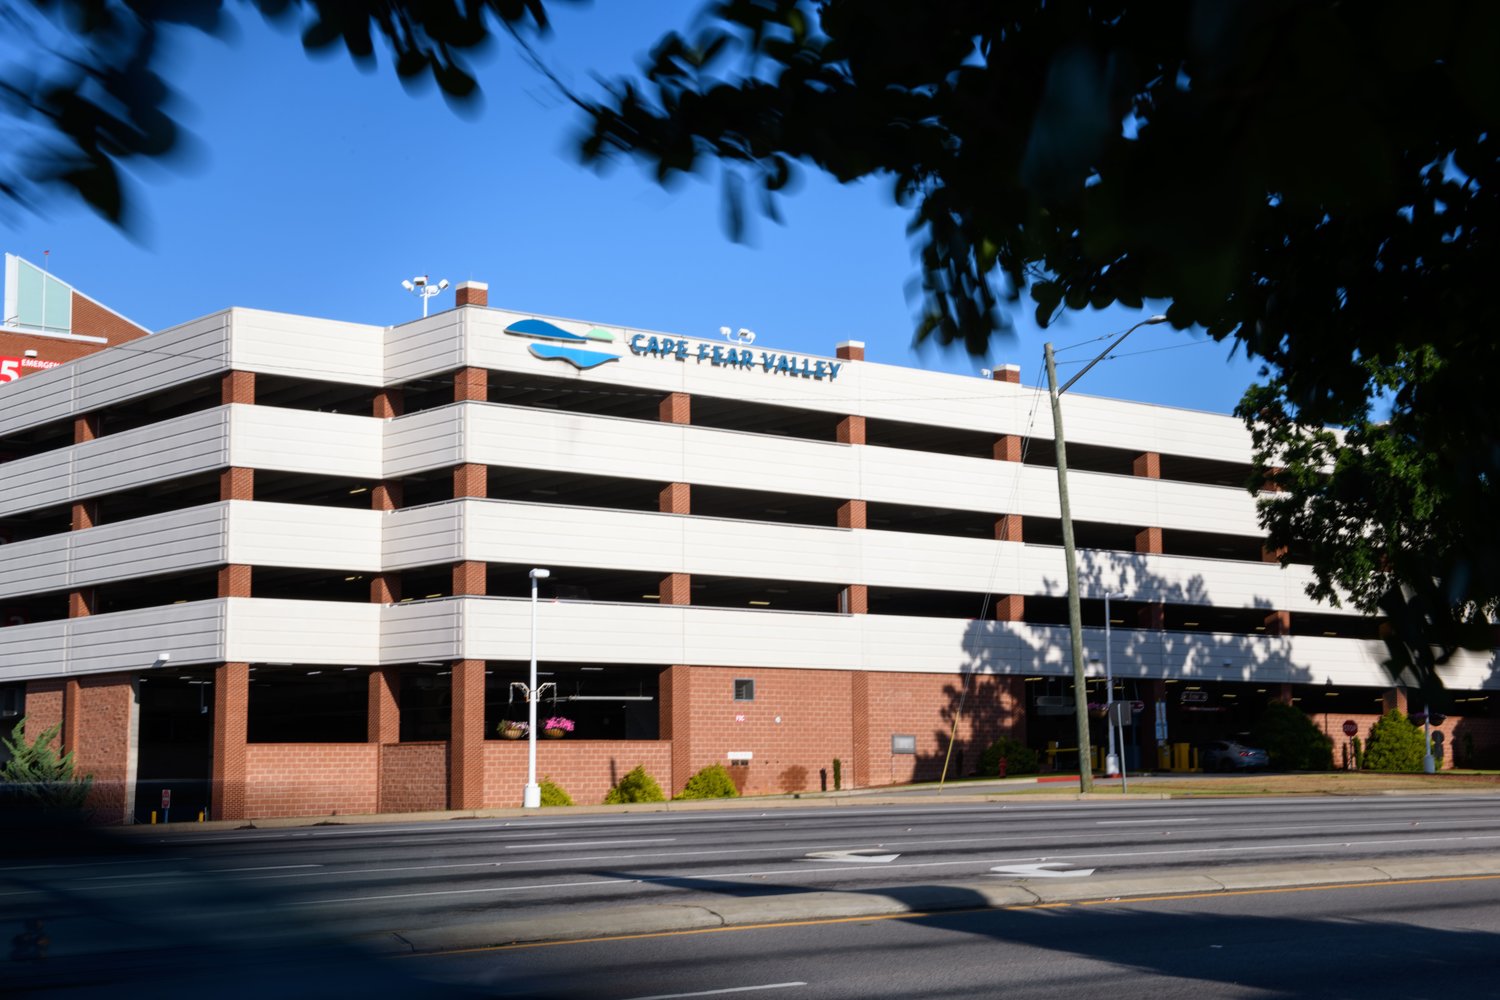 Cape Fear Valley Medical Center has been recognized as a Best Regional Hospital in North Carolina for 2022-23 by U.S. News & World Report.